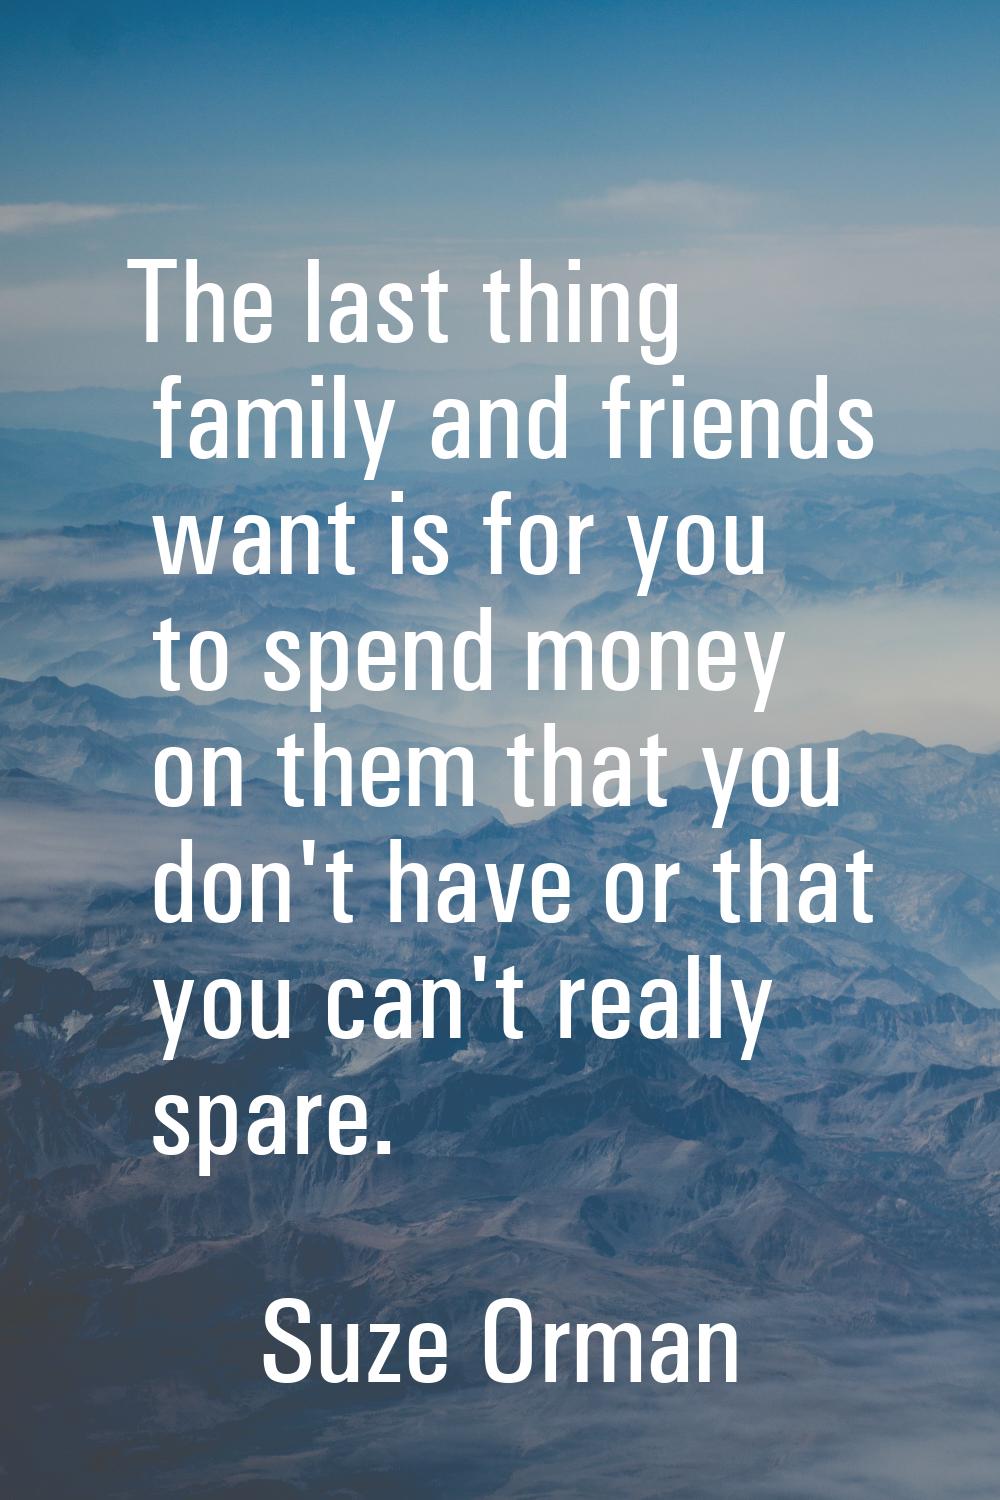 The last thing family and friends want is for you to spend money on them that you don't have or tha